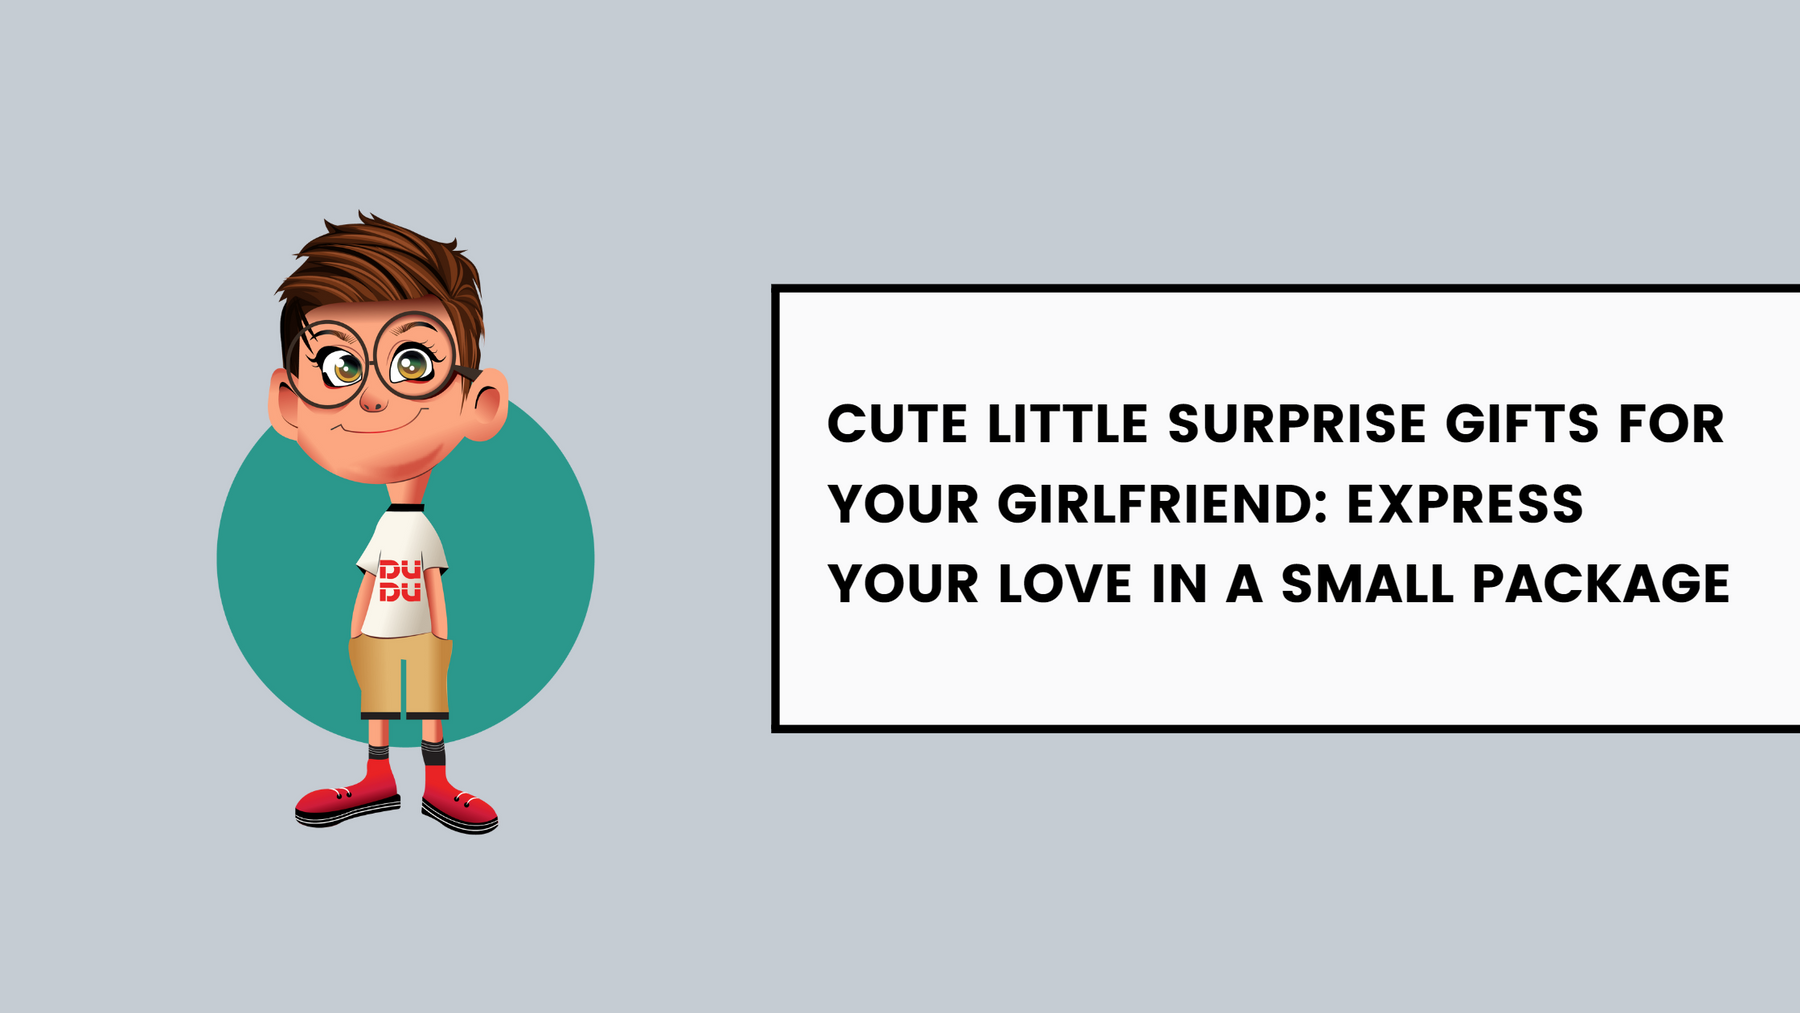 Cute Little Surprise Gifts For Your Girlfriend: Express Your Love In A Small Package